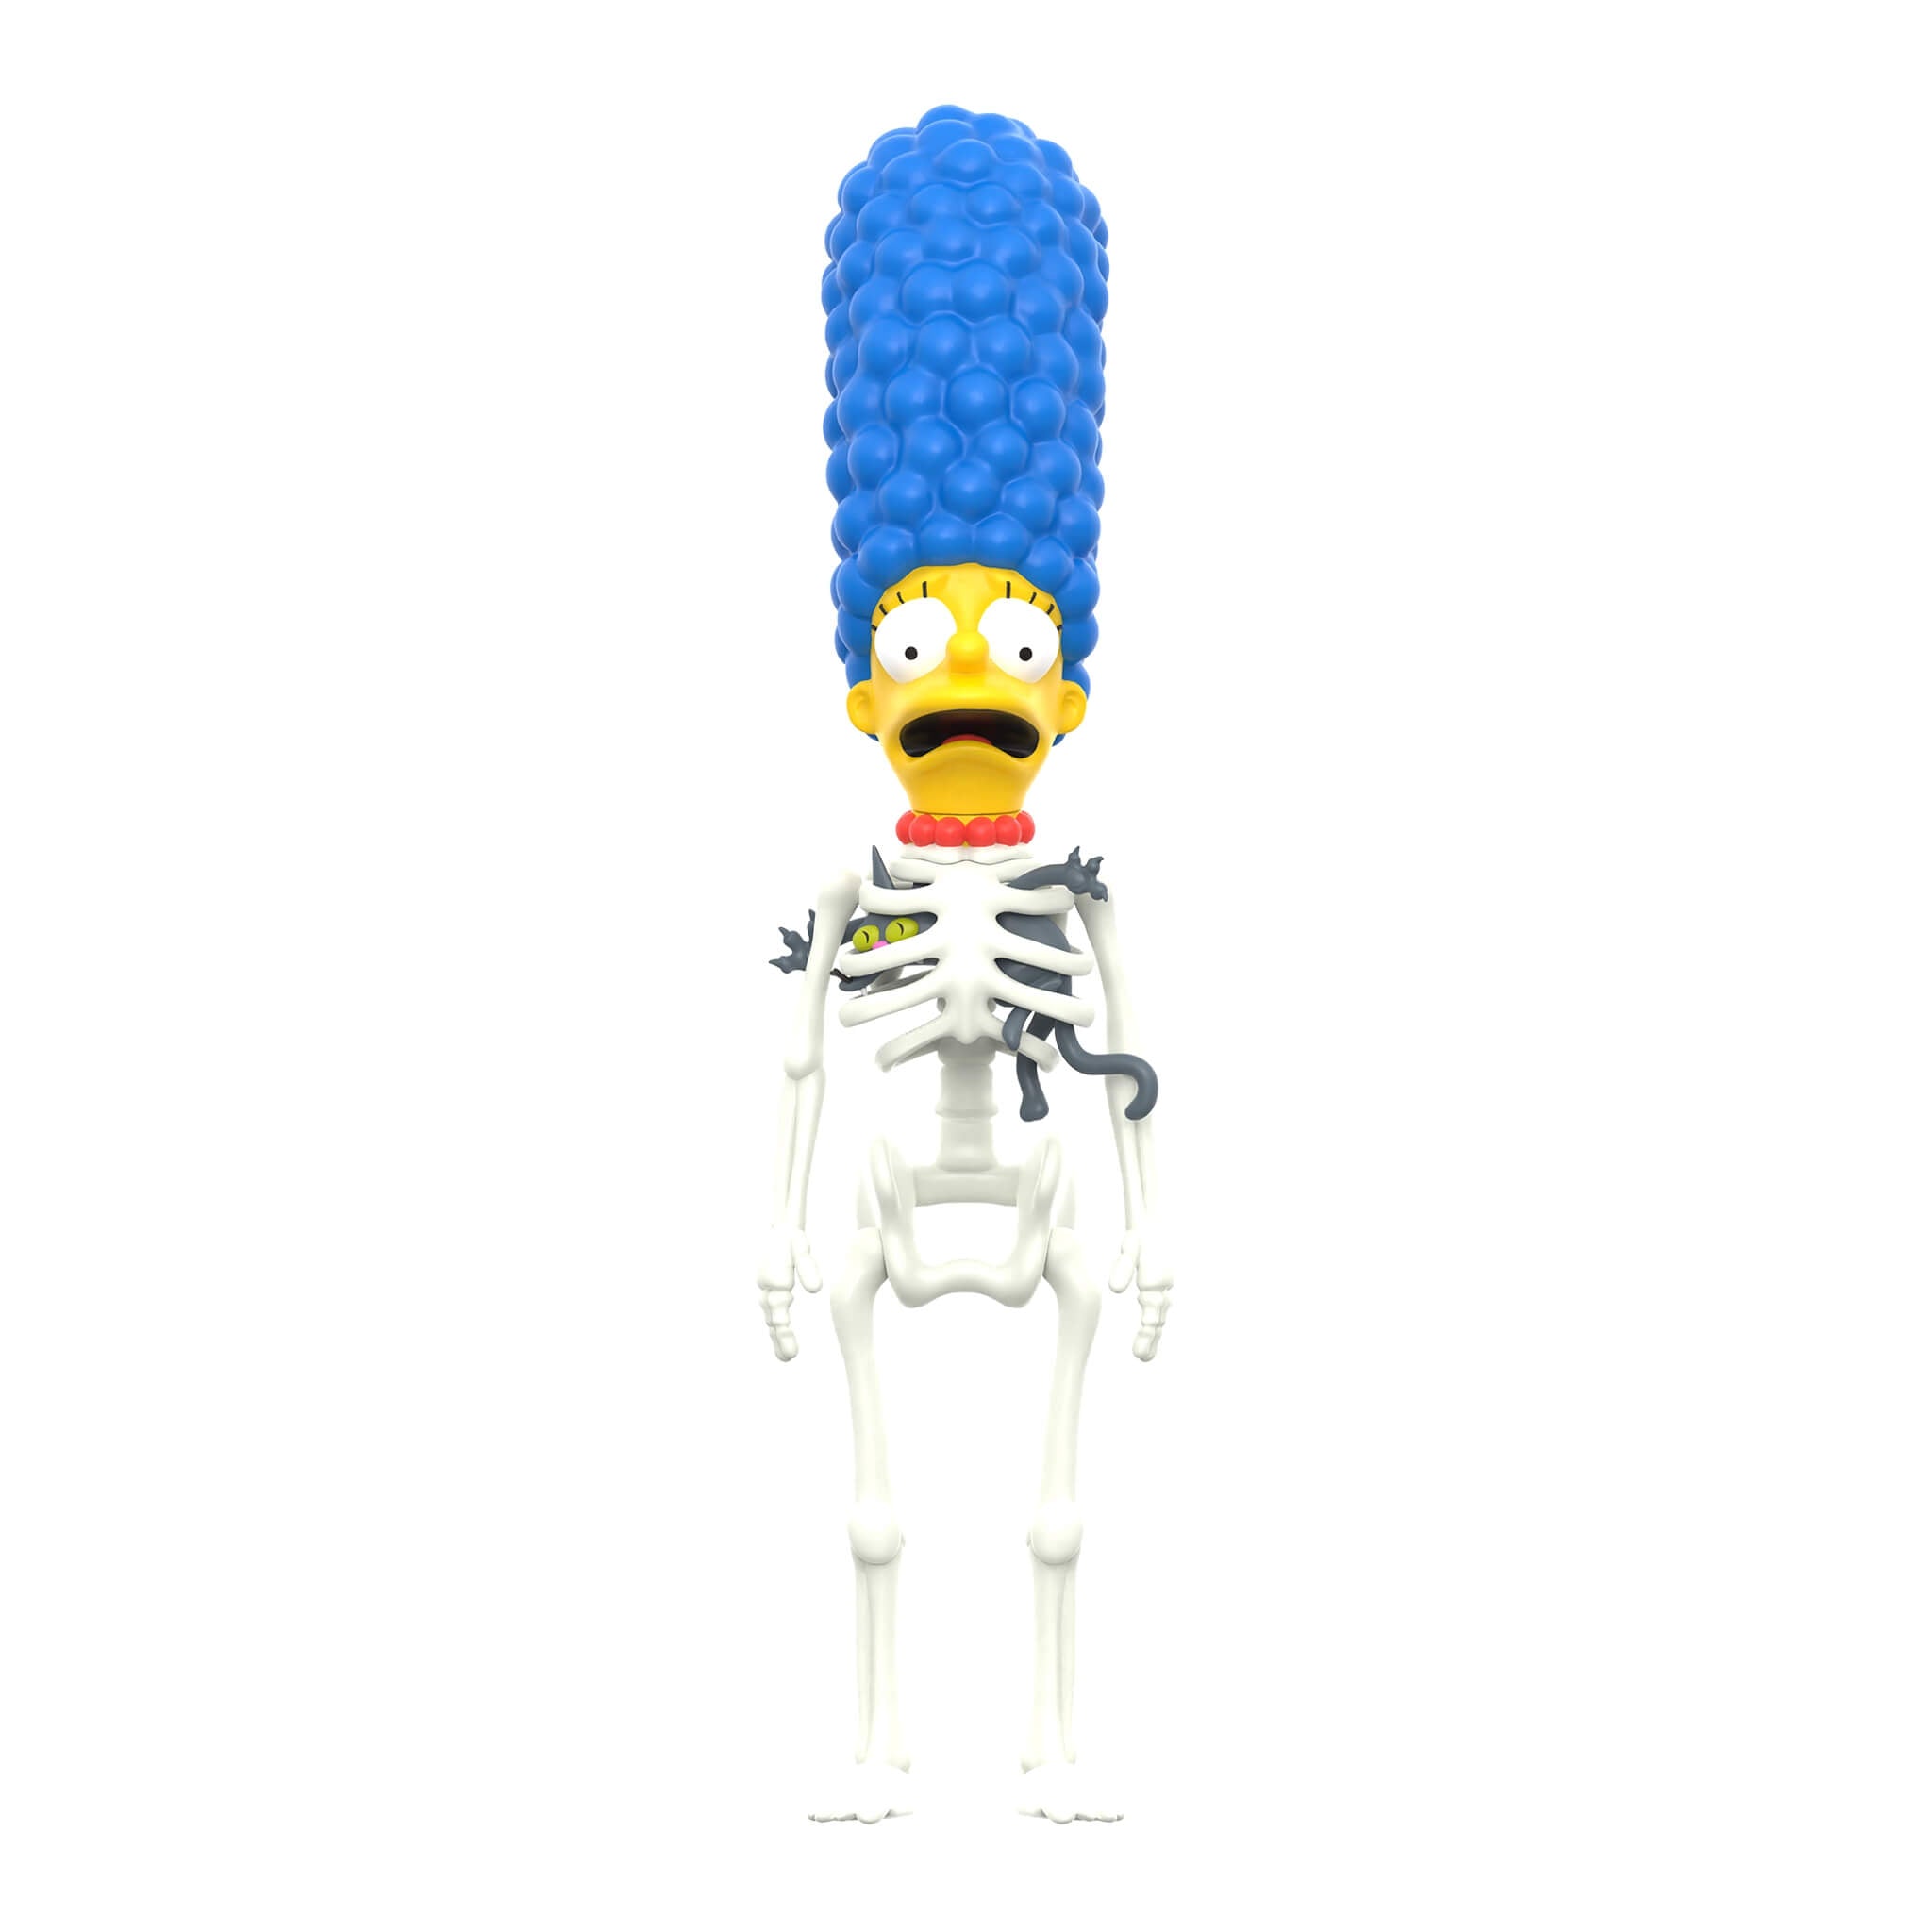 THE SIMPSONS REACTION WAVE 3 'TREEHOUSE OF HORROR - SKELETON MARGE' FIGURE